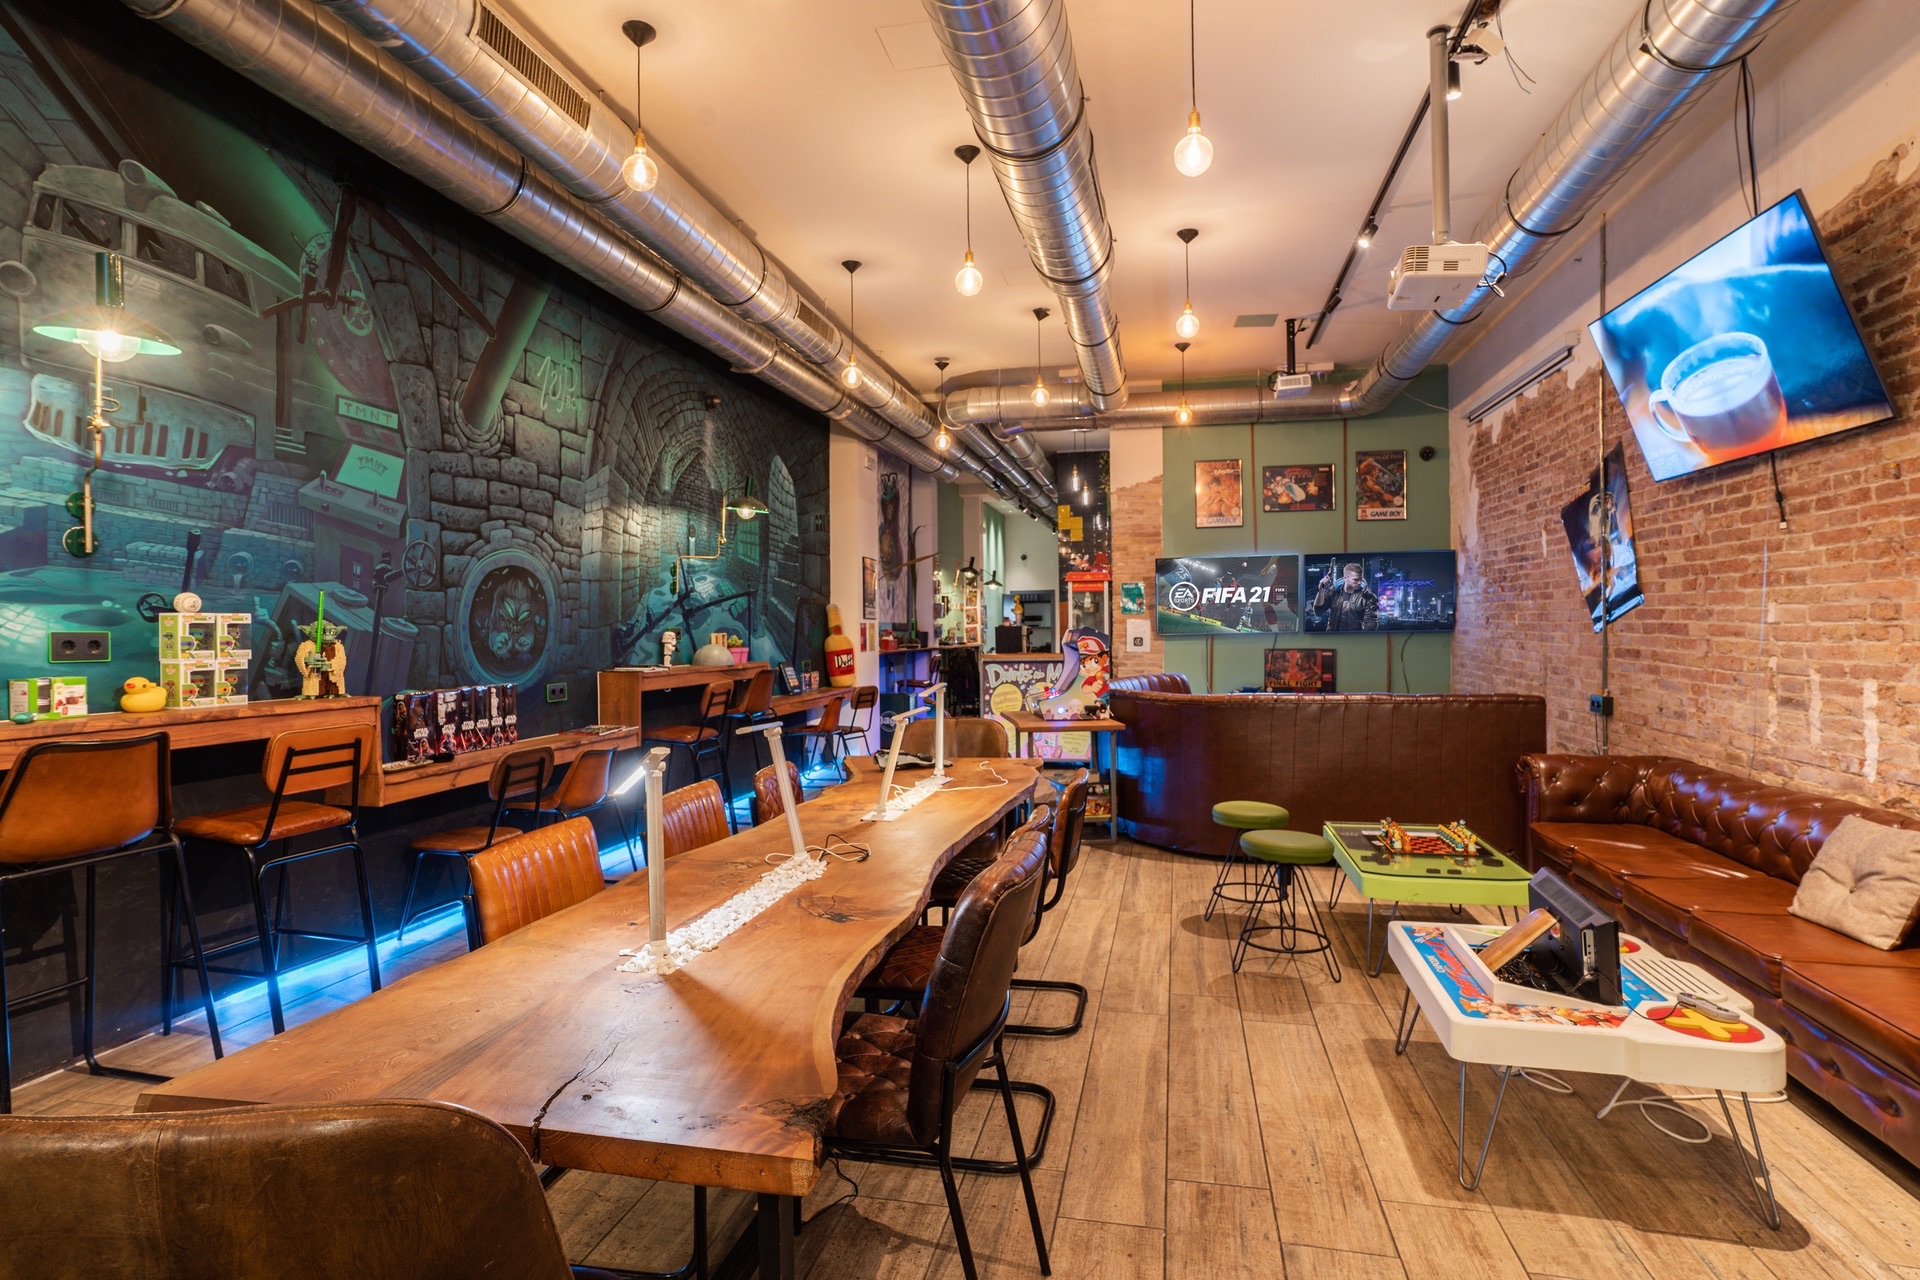 Spazio di coworking nel weed cafe 1UP Barcellona